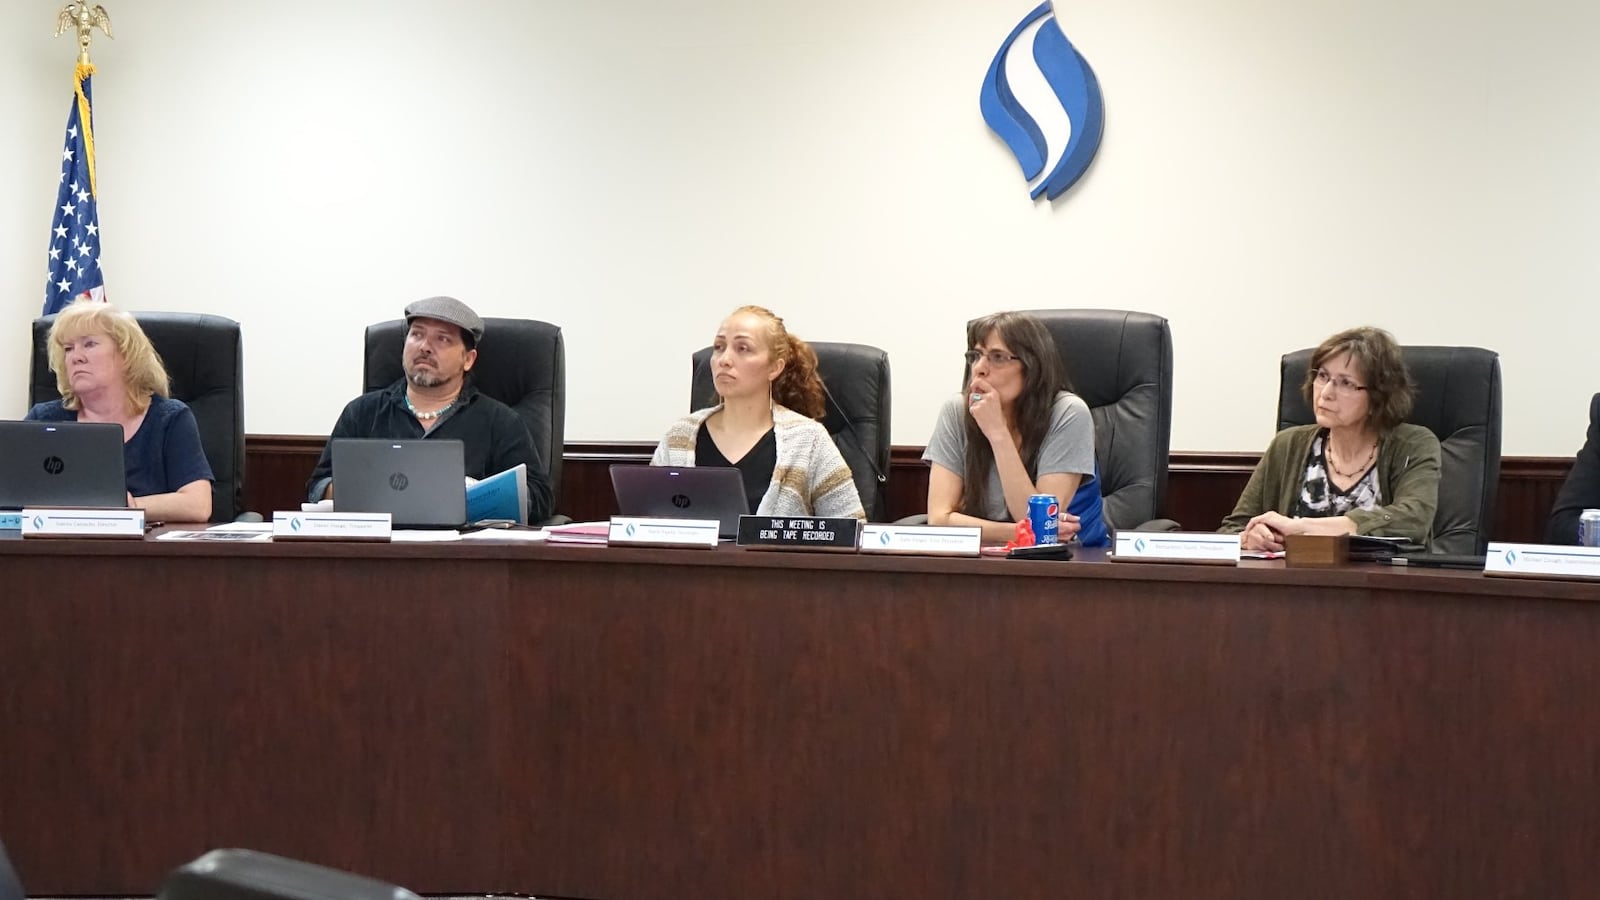 Sheridan school board members and Superintendent Michael Clough, right, at earlier meeting in 2018. (Photo courtesy of Sheridan School District)